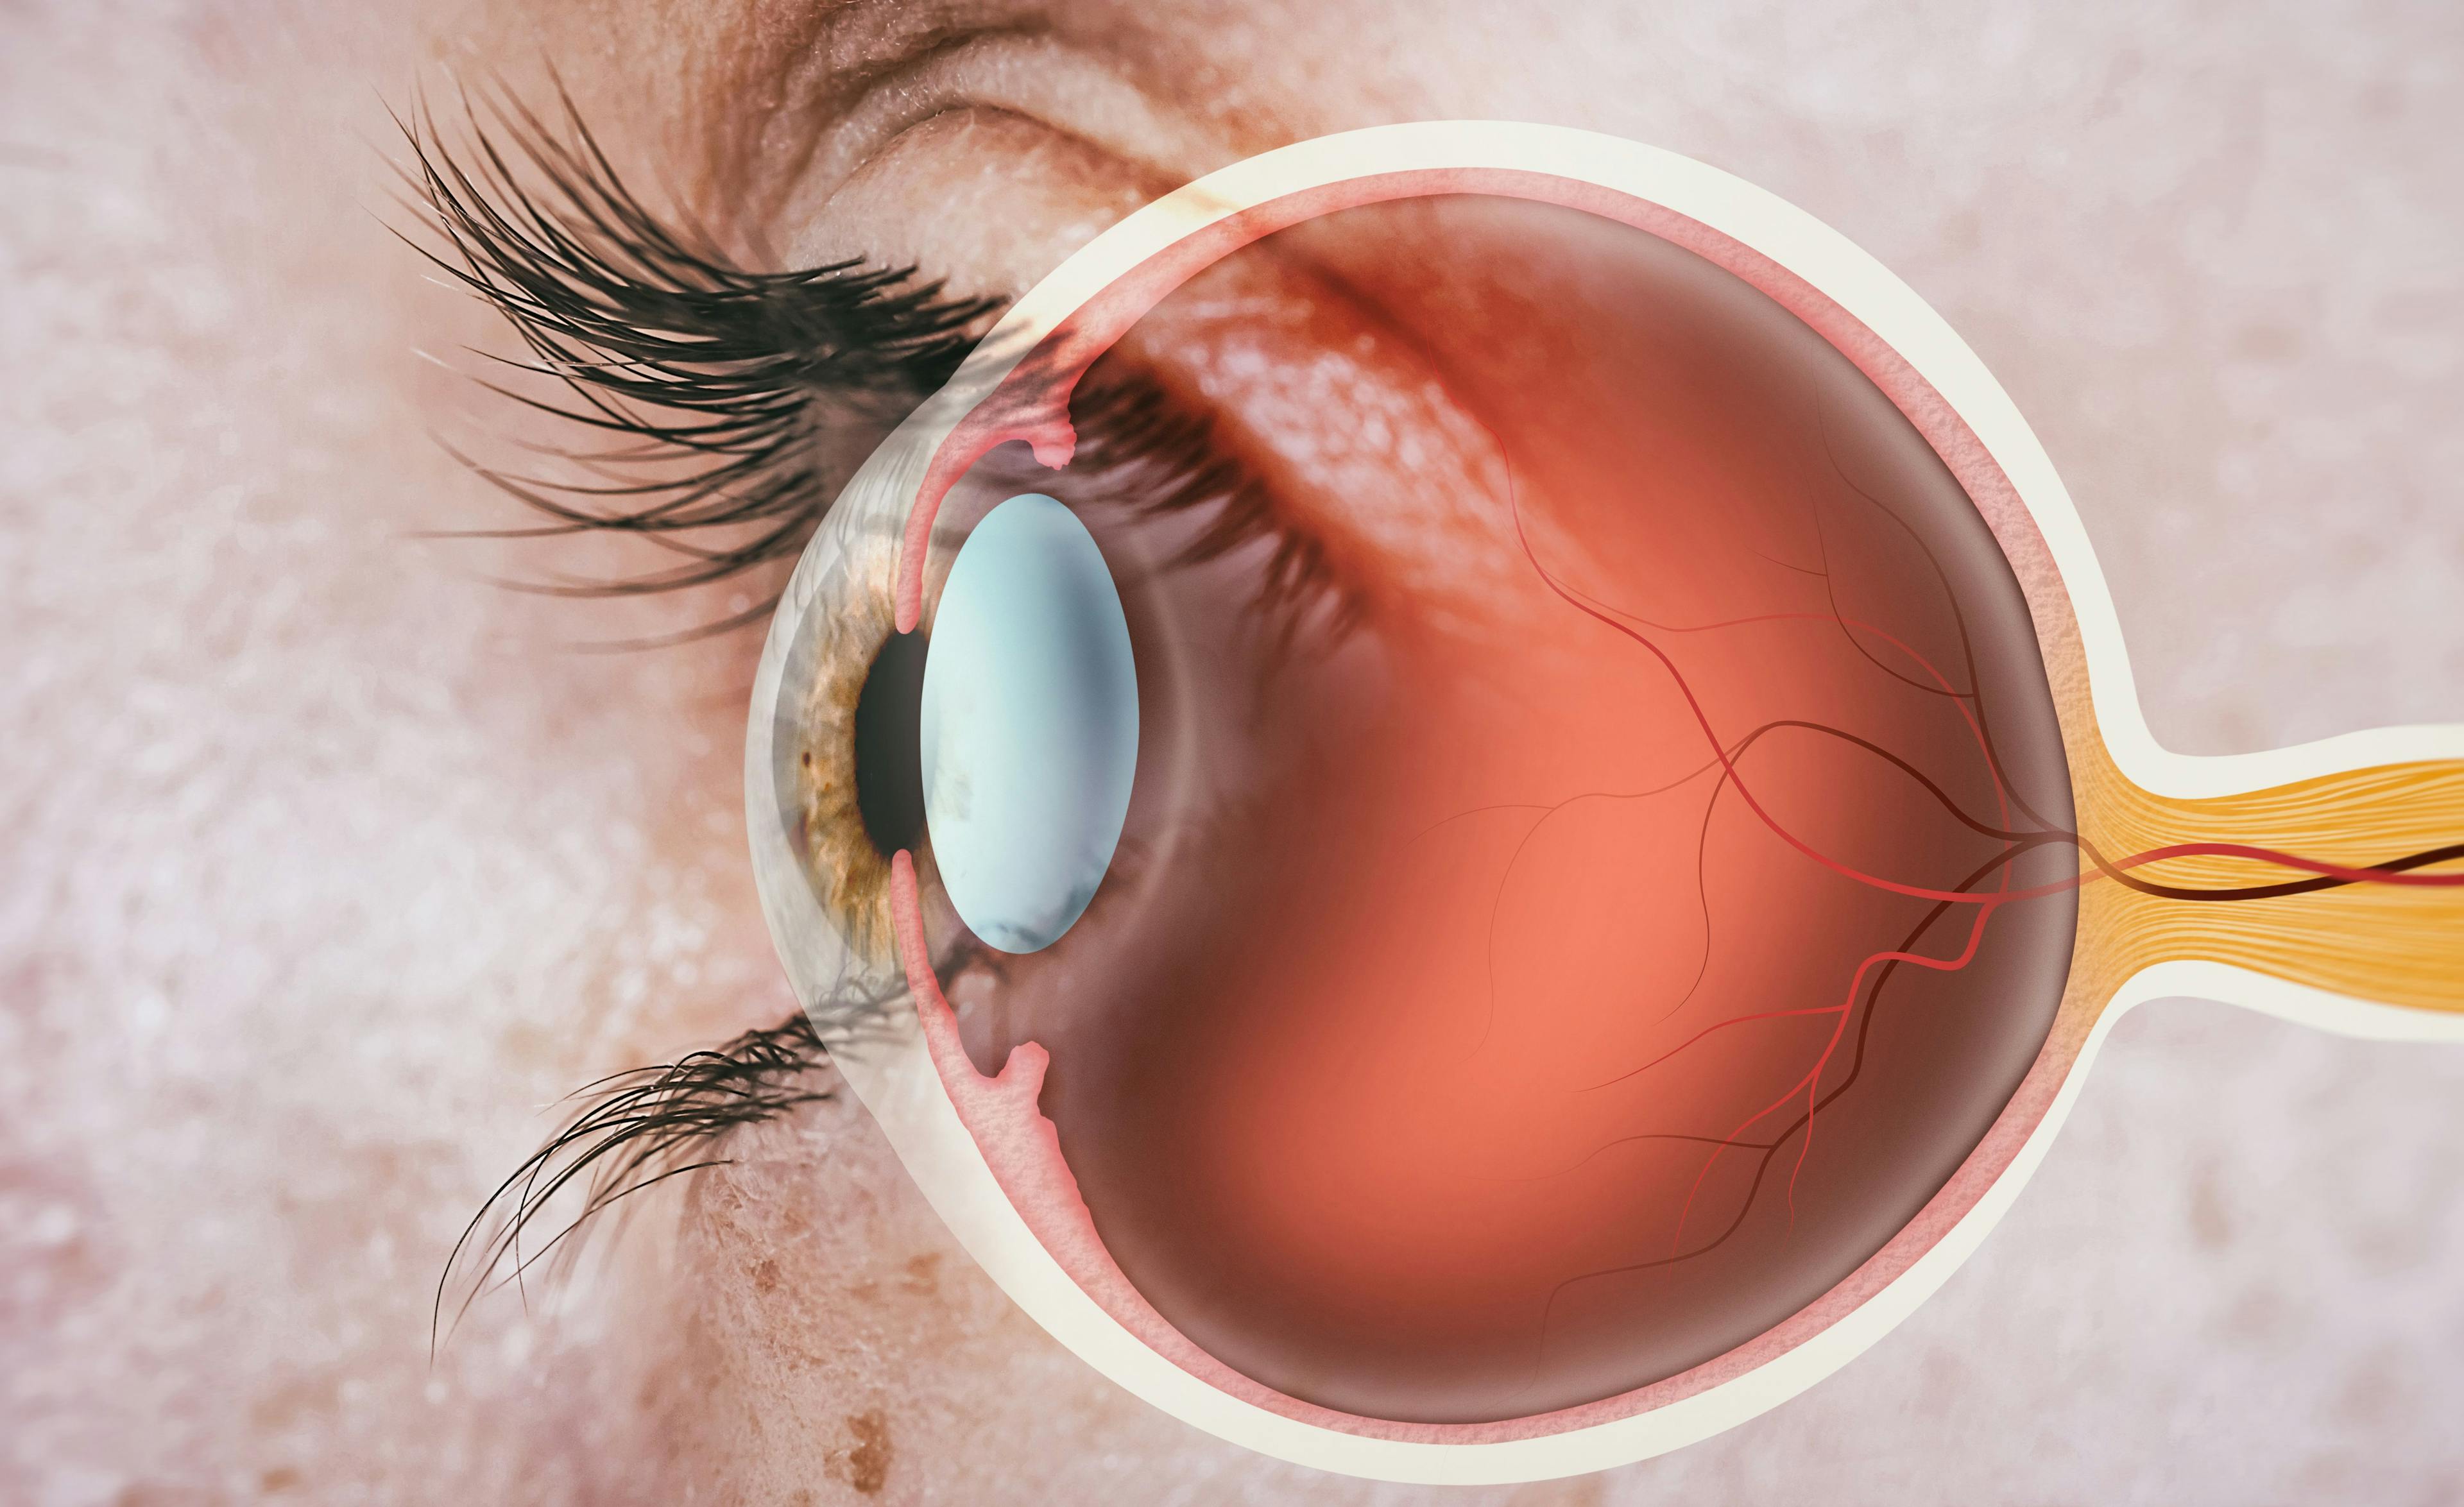 Study: Hispanic and Black patients who underwent retinal detachment surgery had worse vision results than white patients 